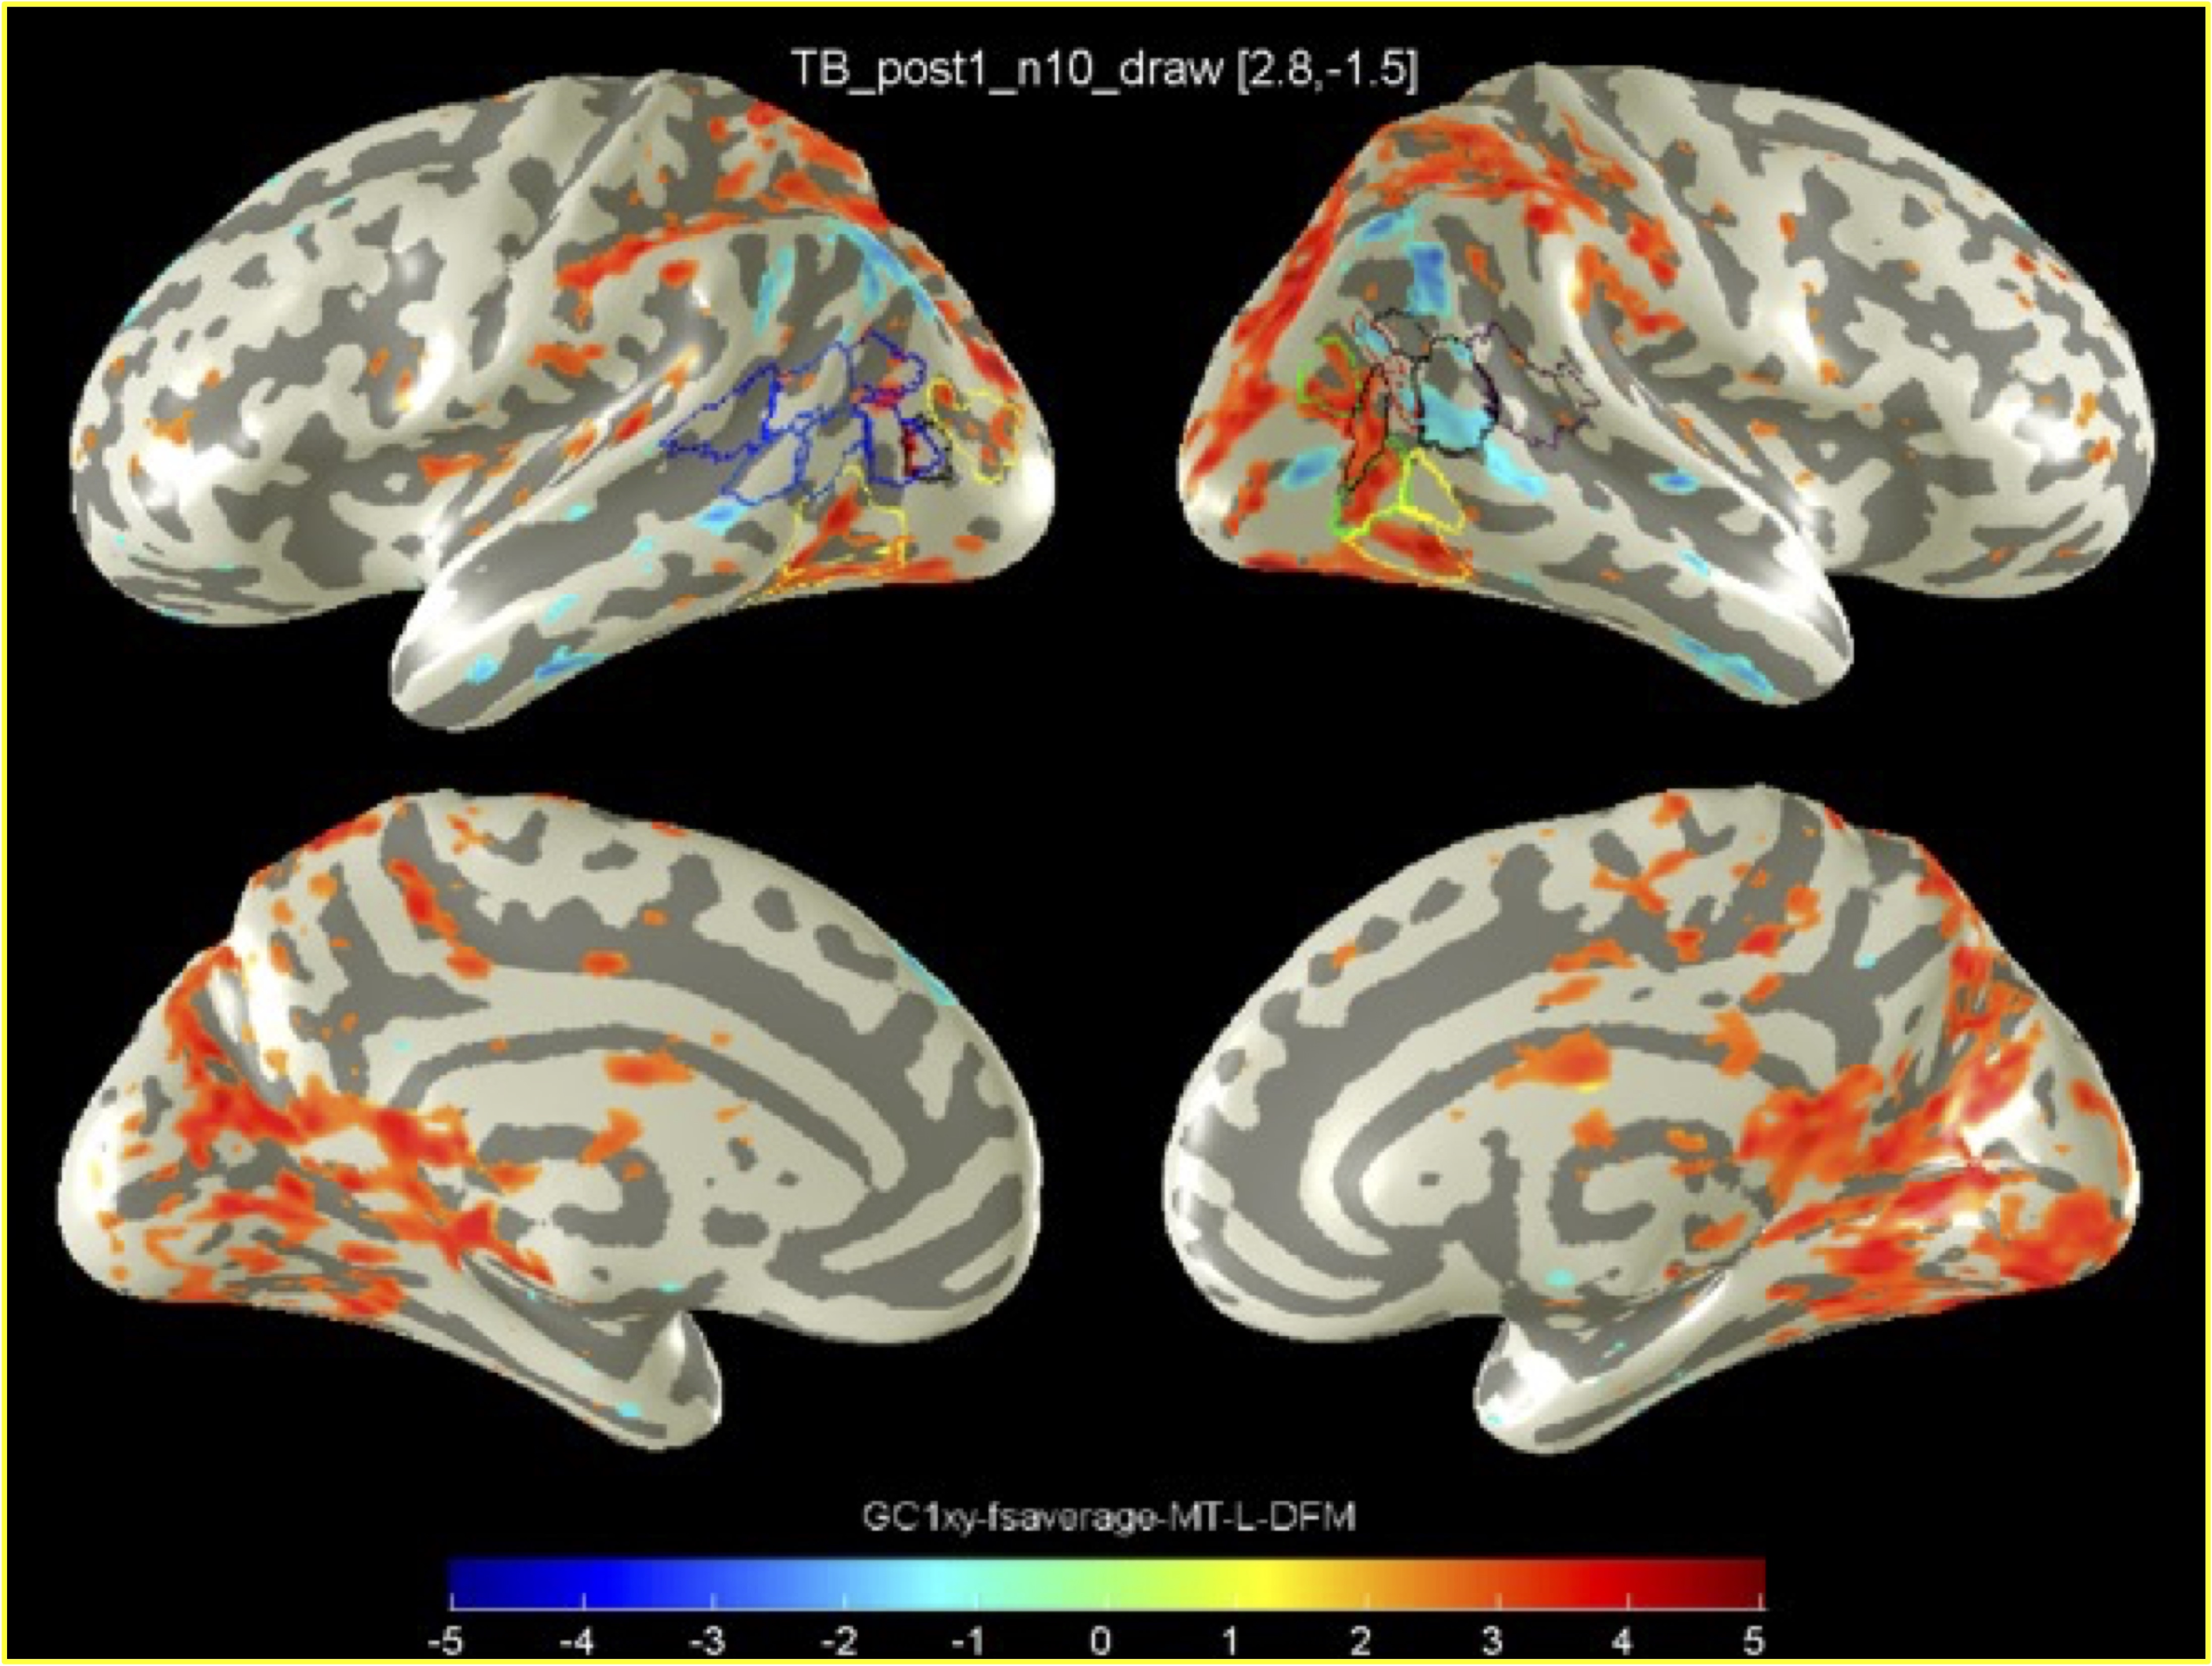 Images of the lateral and medial surface of the inflated human brain showing the average activation of blind people after learning to draw complex line images.